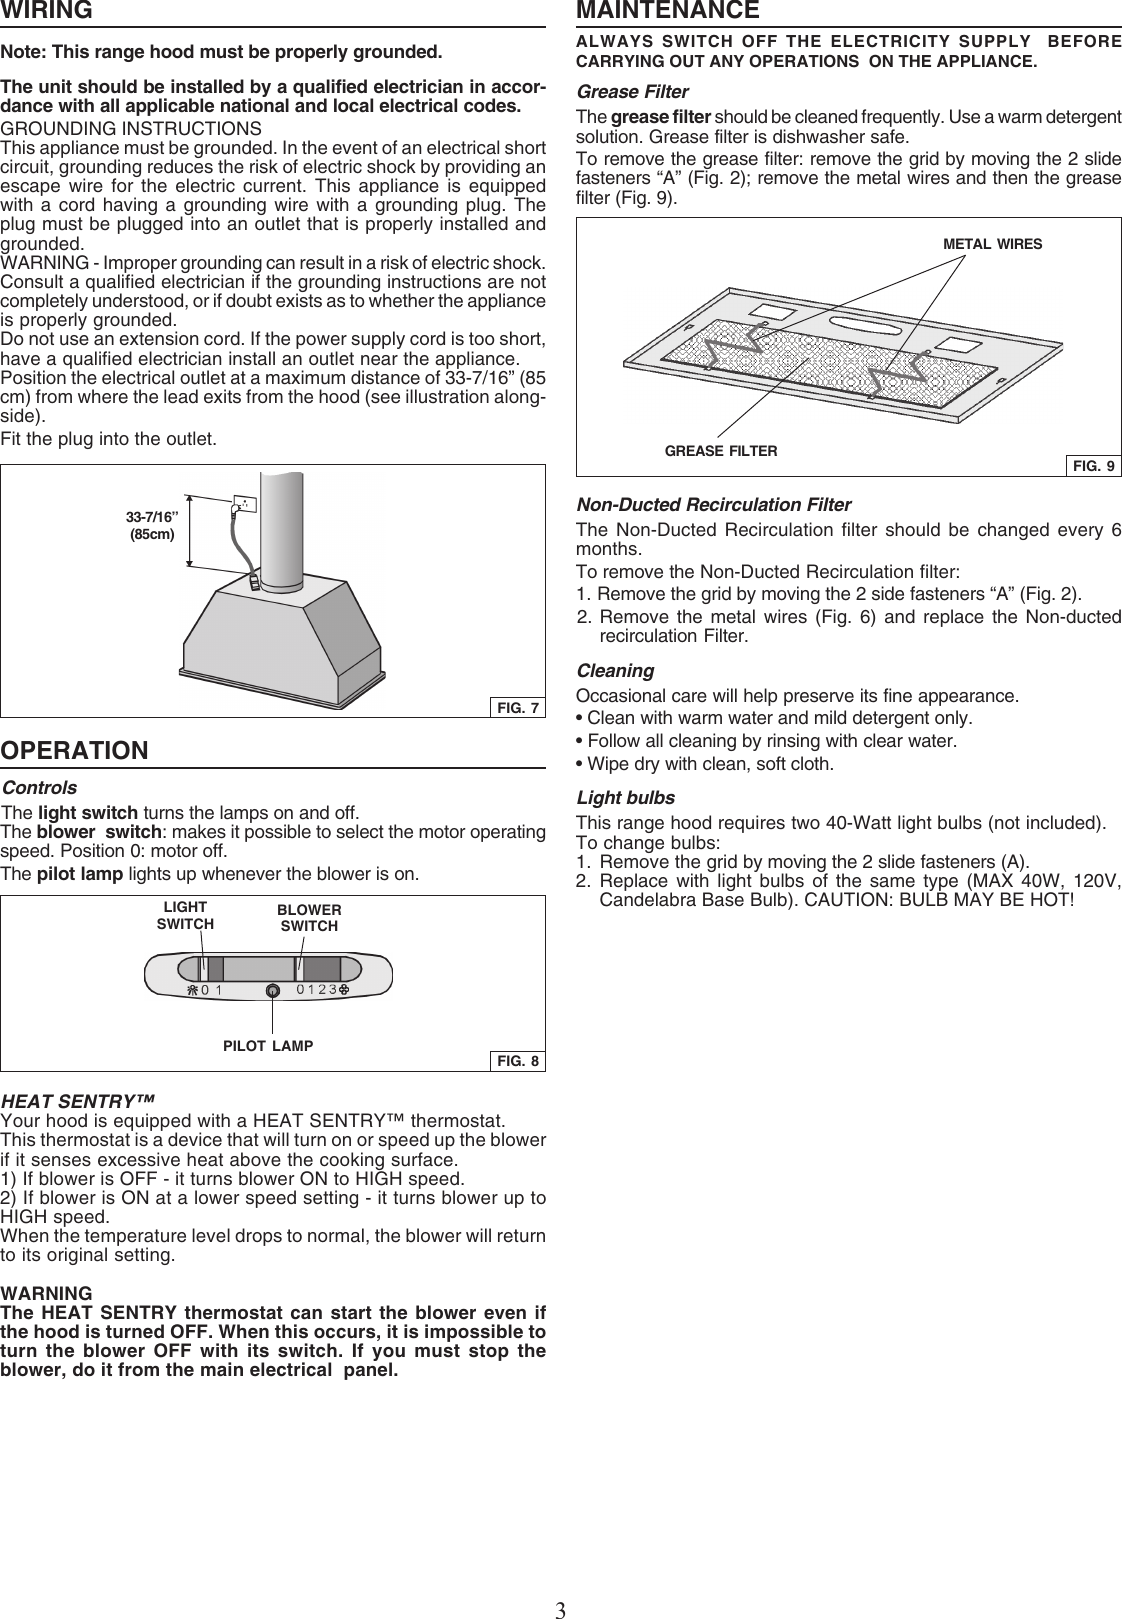 Broan Pm390Hs Users Manual PM390HSGuide